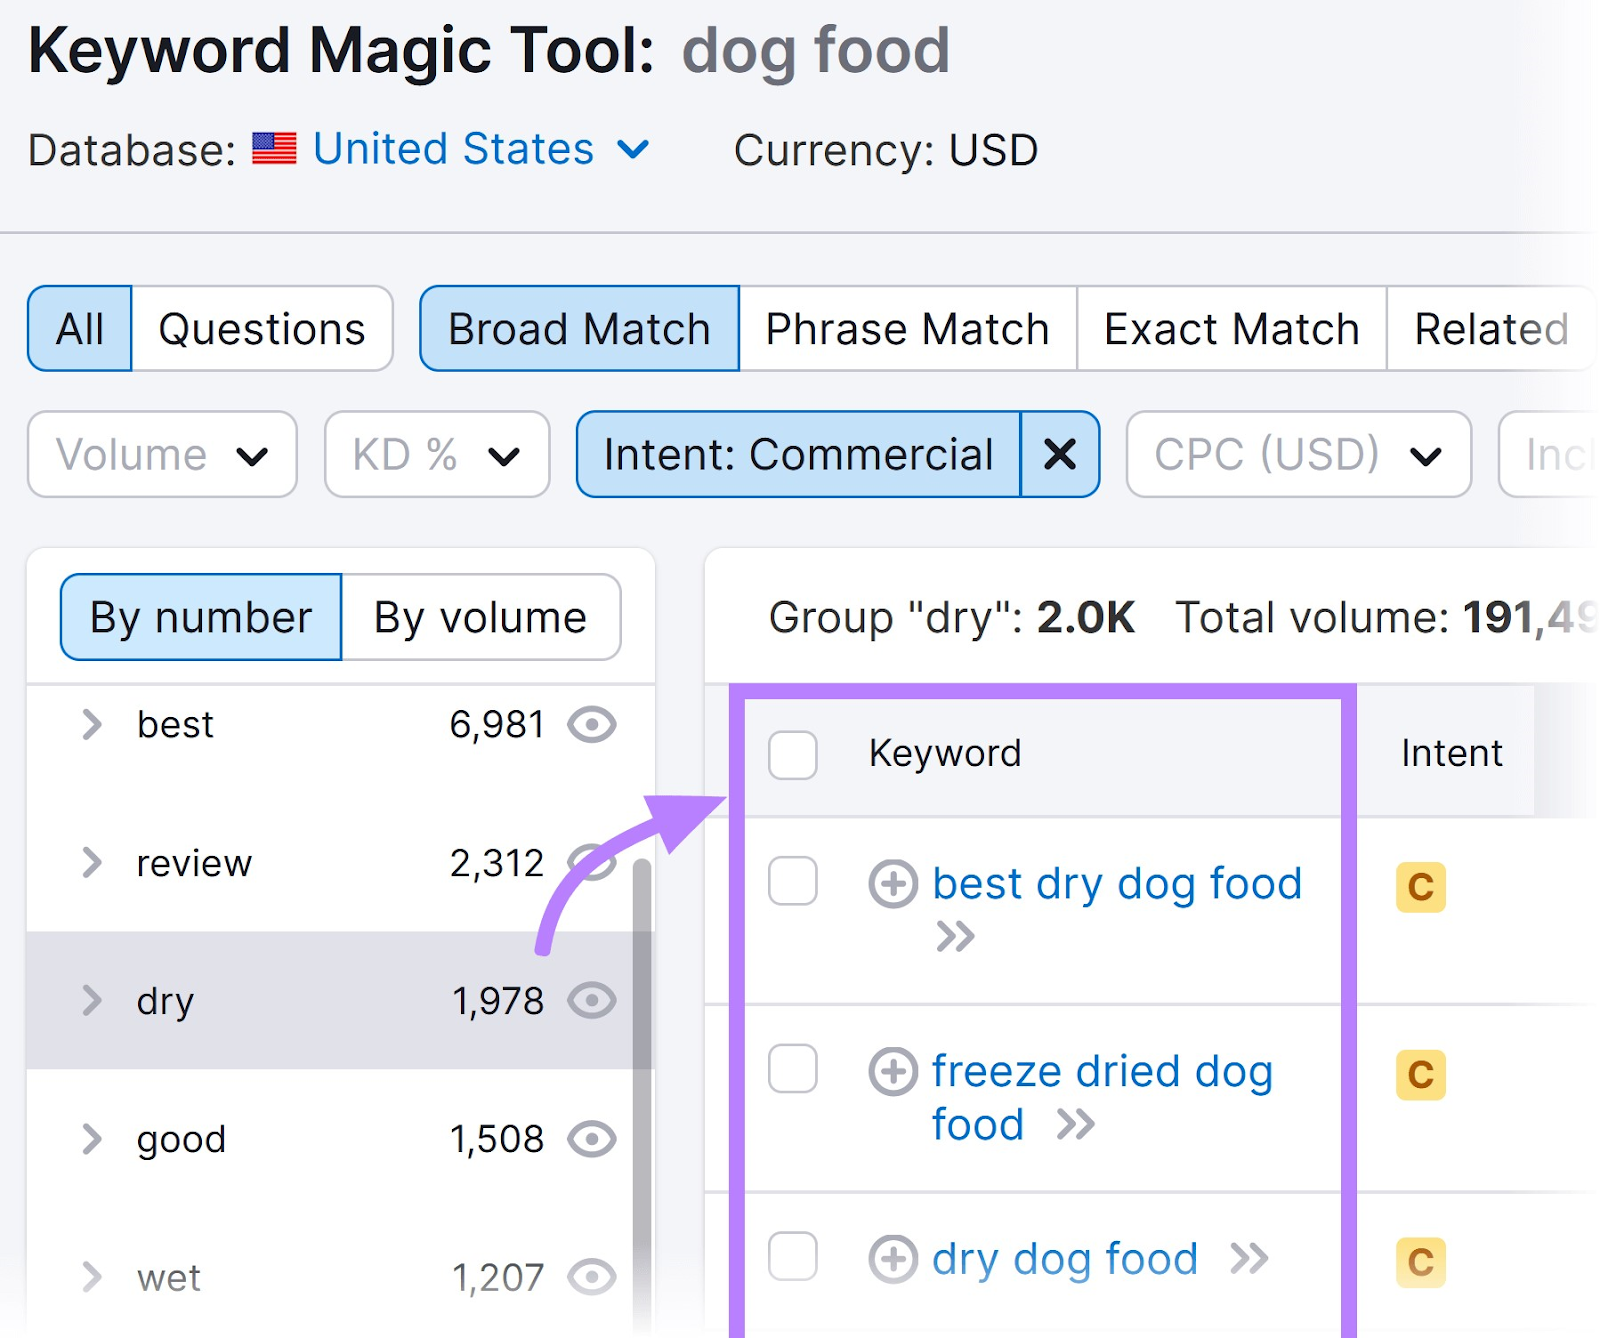 selecting a subgroup of keywords related to “dry” food